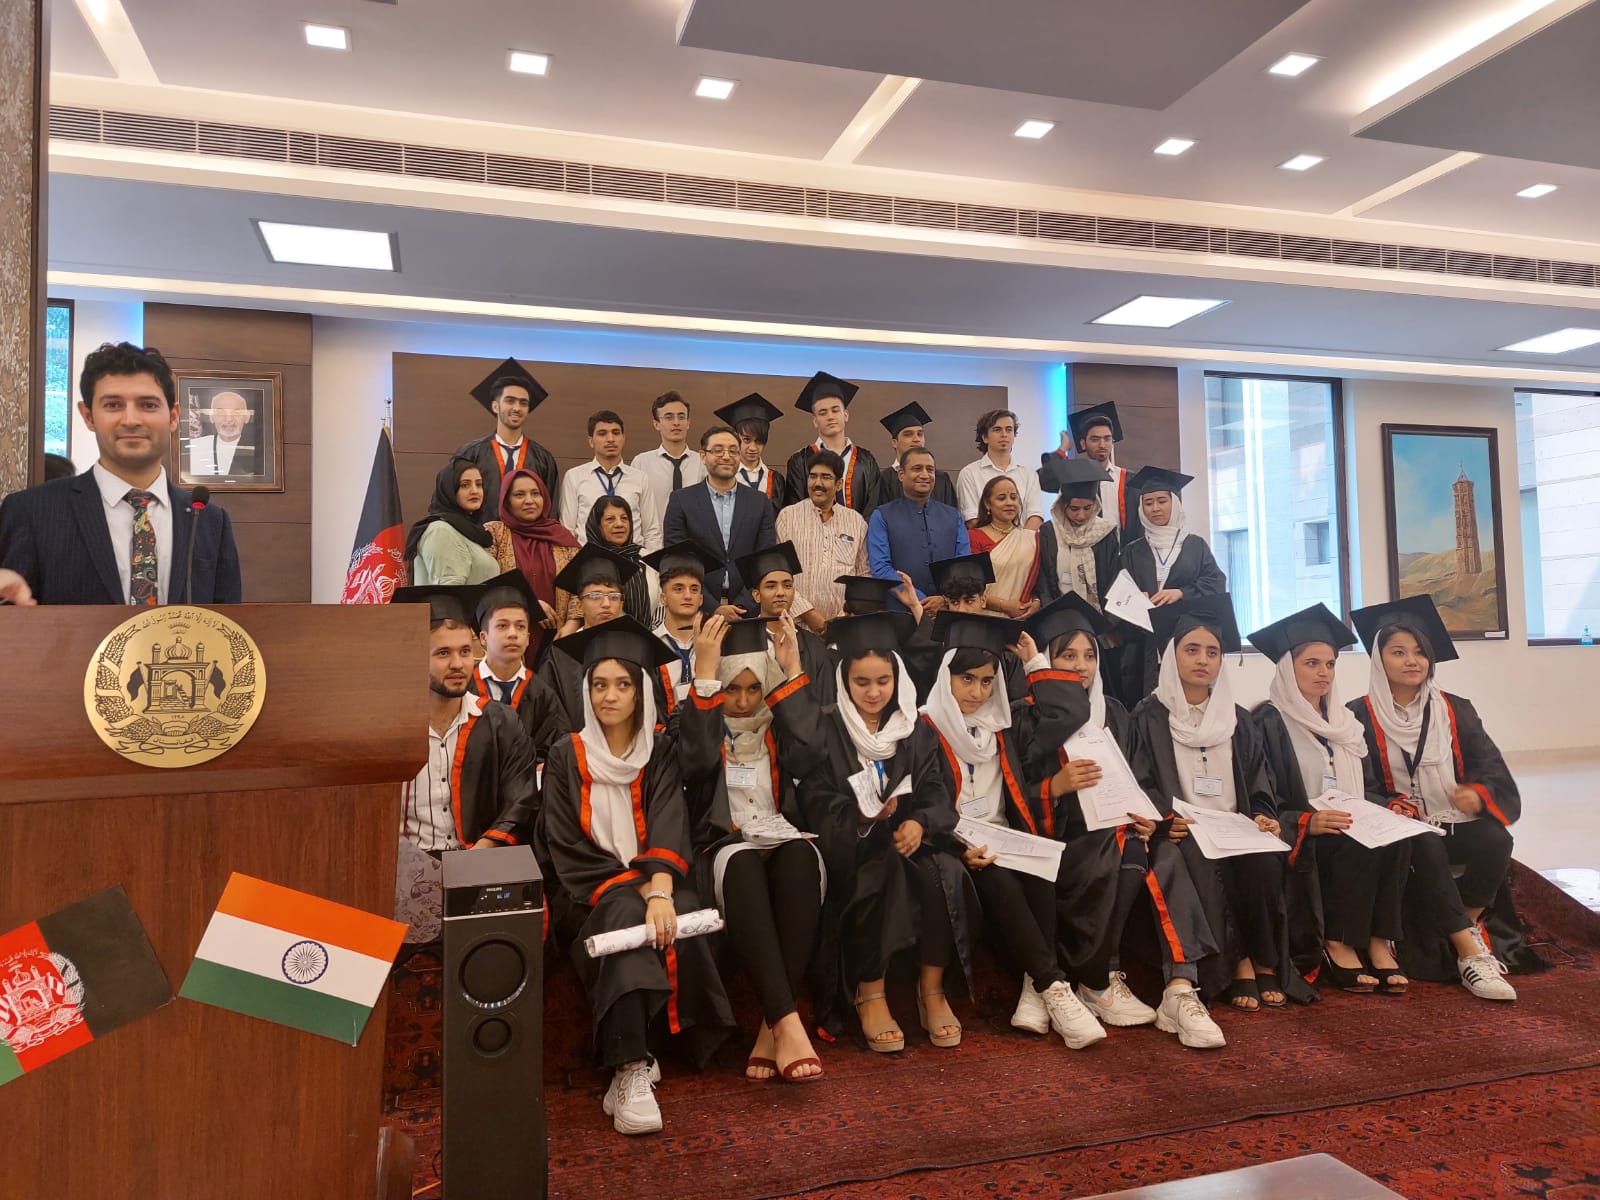 World BEYOND War Afghanistan chapter coordinator Dr. Nazir Ahmad Yosufi stands at a podium at left, with rows of students sitting at right in their graduation caps and gowns holding their diplomas.